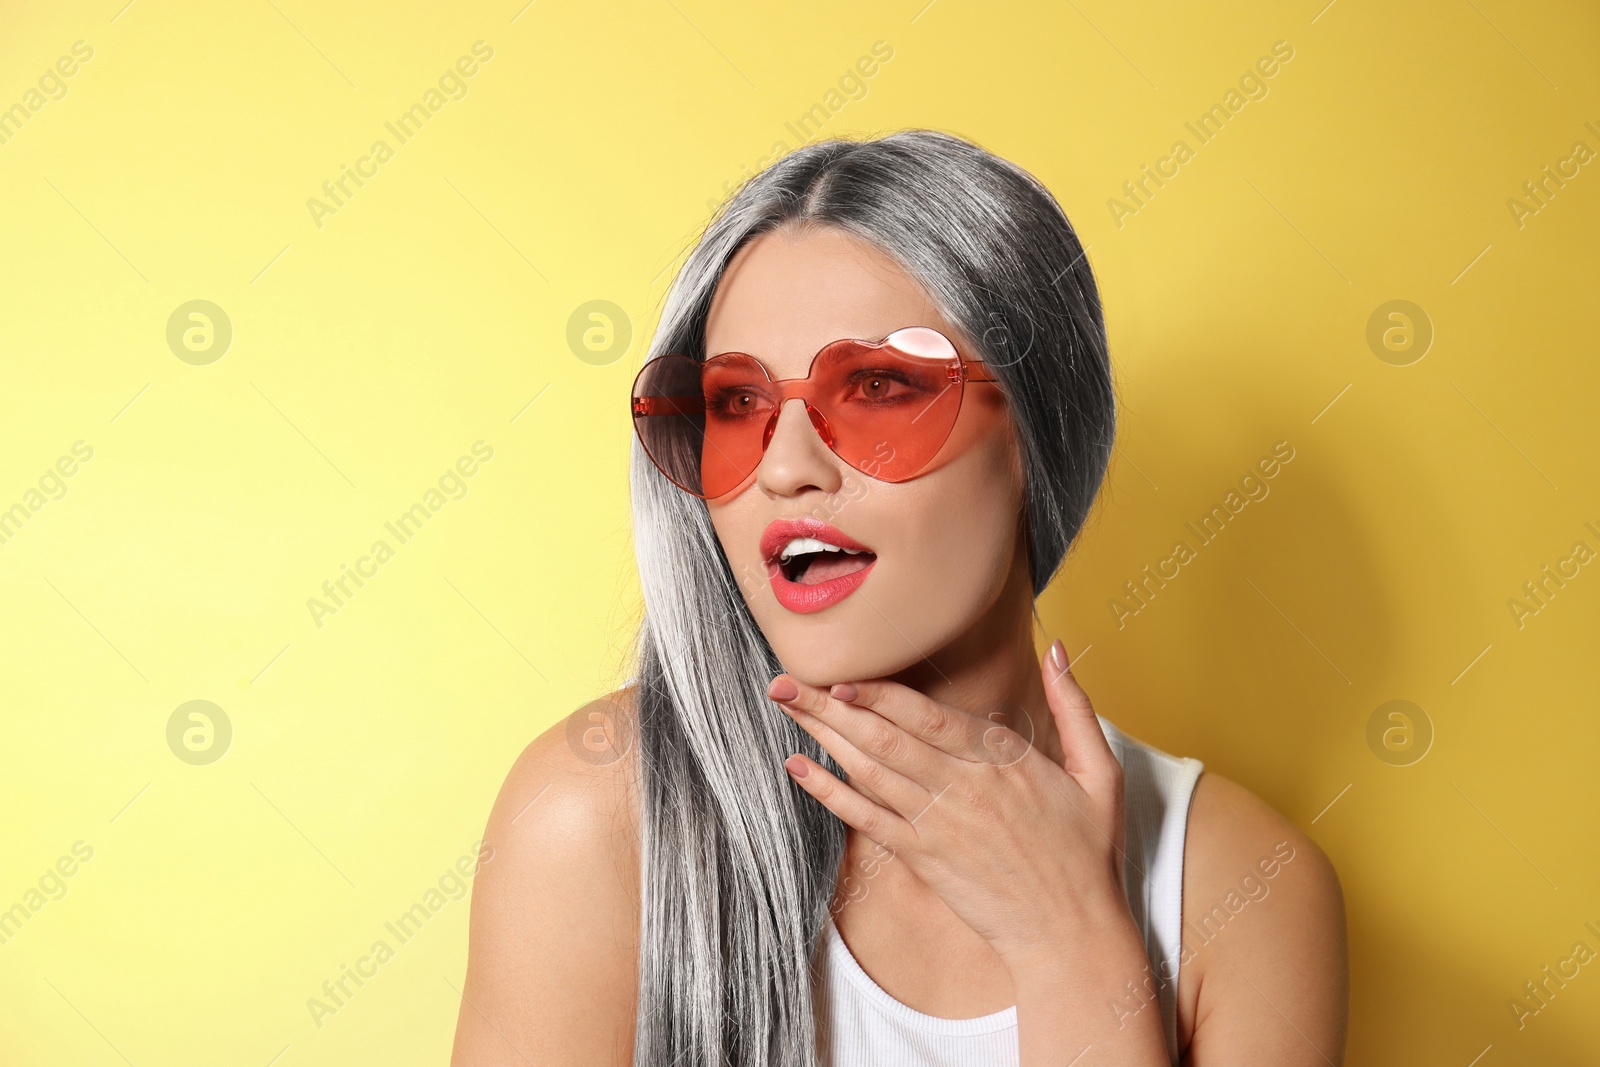 Image of Portrait of young woman with beautiful grey colored hair on yellow background